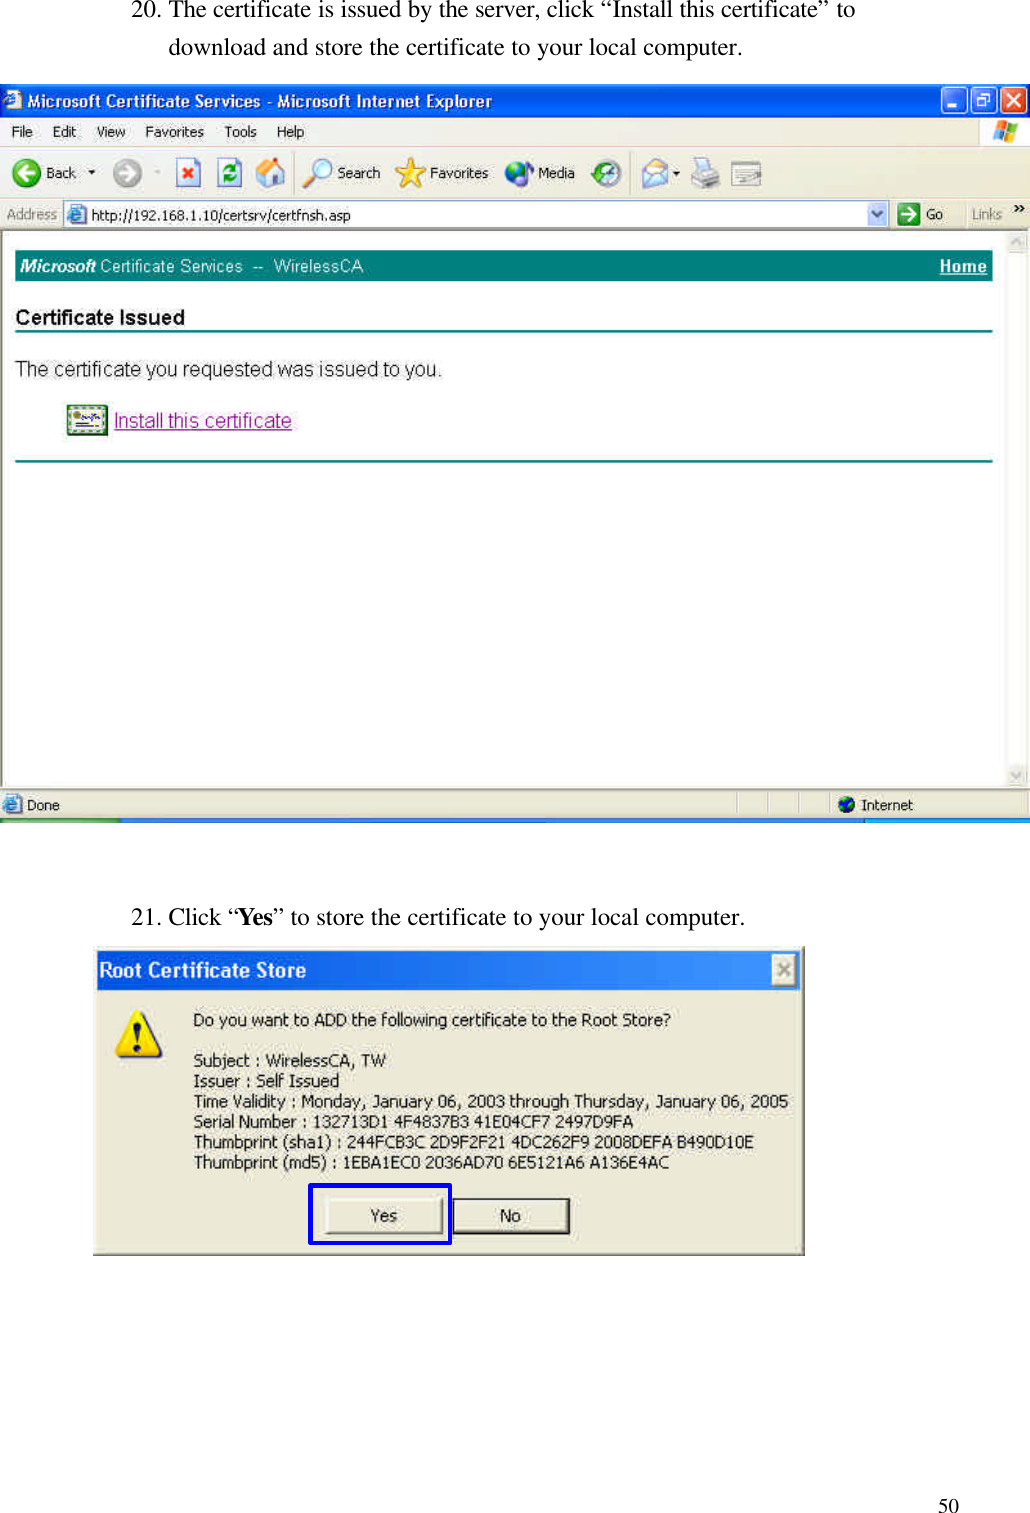  5020. The certificate is issued by the server, click “Install this certificate” to download and store the certificate to your local computer.   21. Click “Yes” to store the certificate to your local computer.             